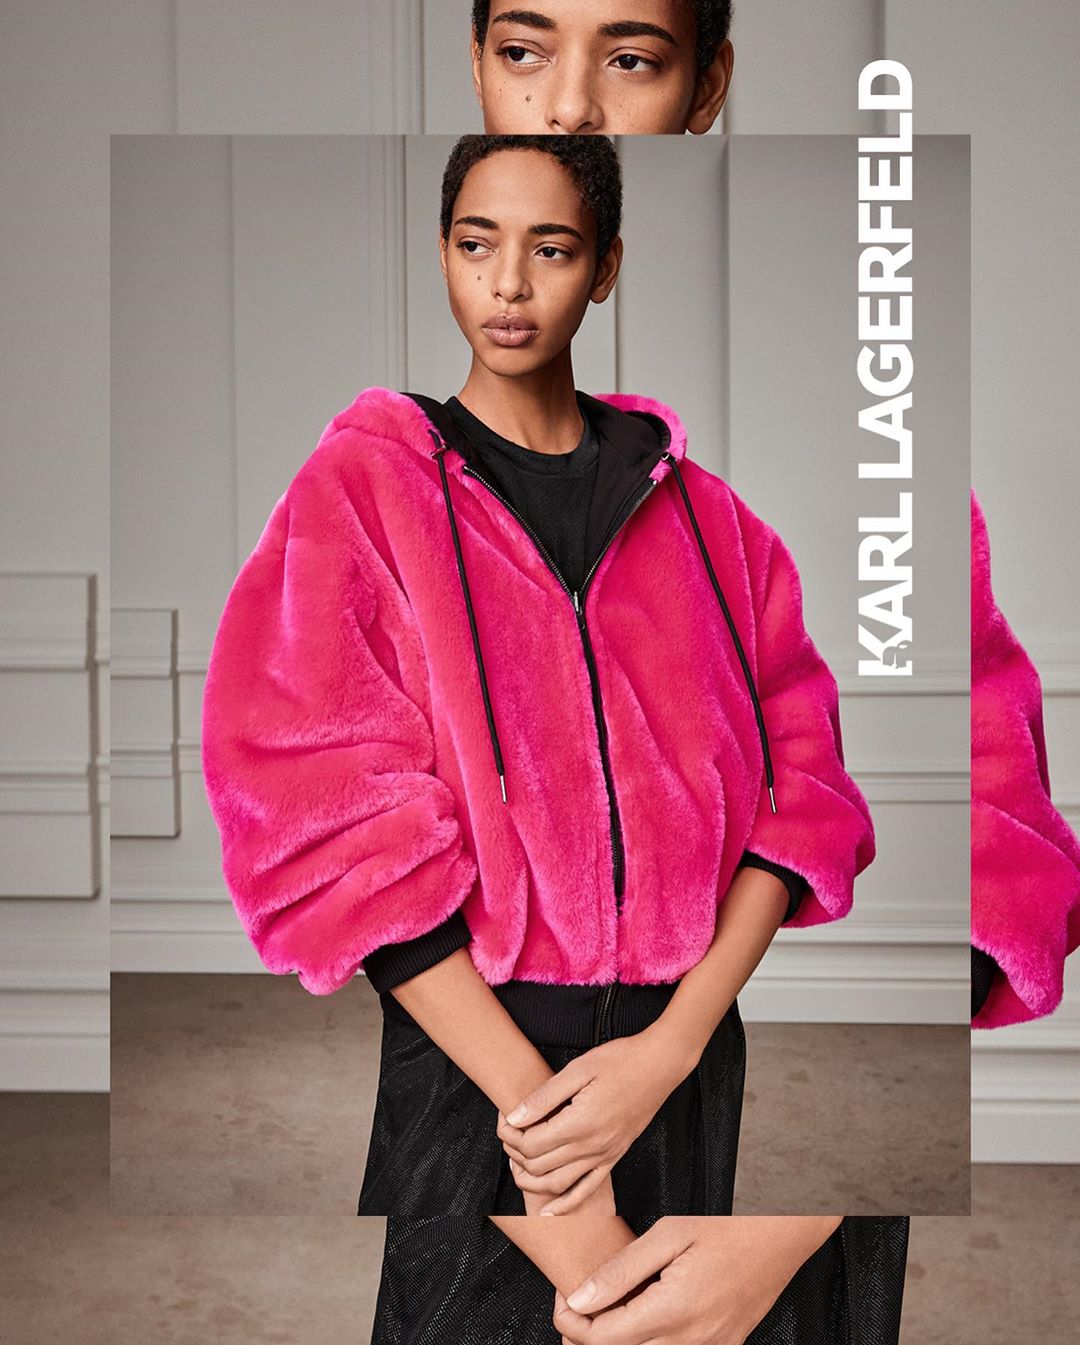 KARL LAGERFELD - Cozy✔️ Soft✔️Reversible✔️ This faux fur bomber has it all. #KARLLAGERFELD #FALL2020